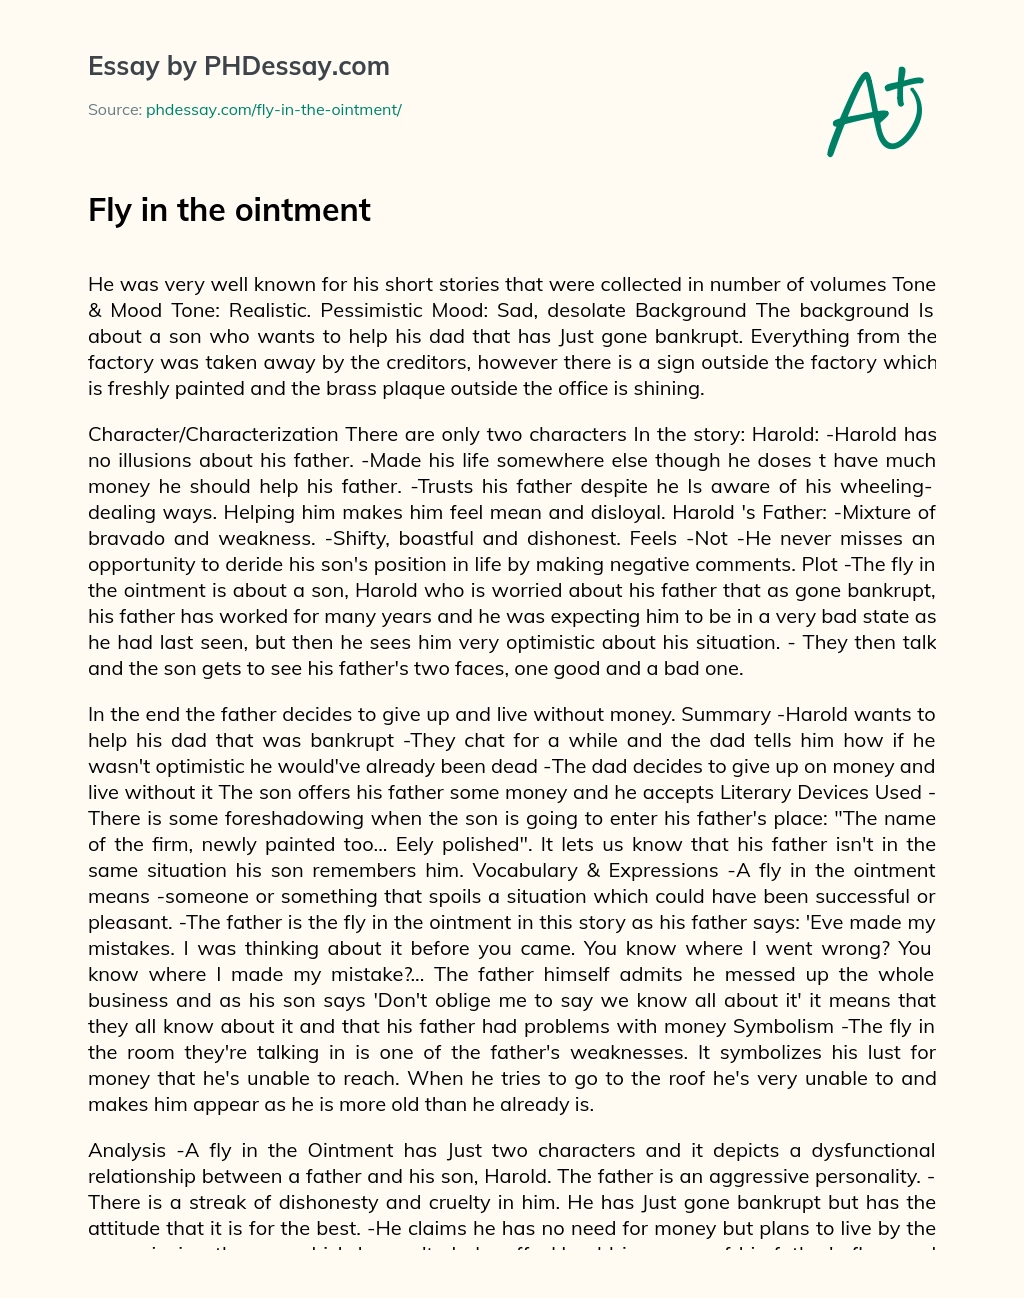 Fly in the ointment essay